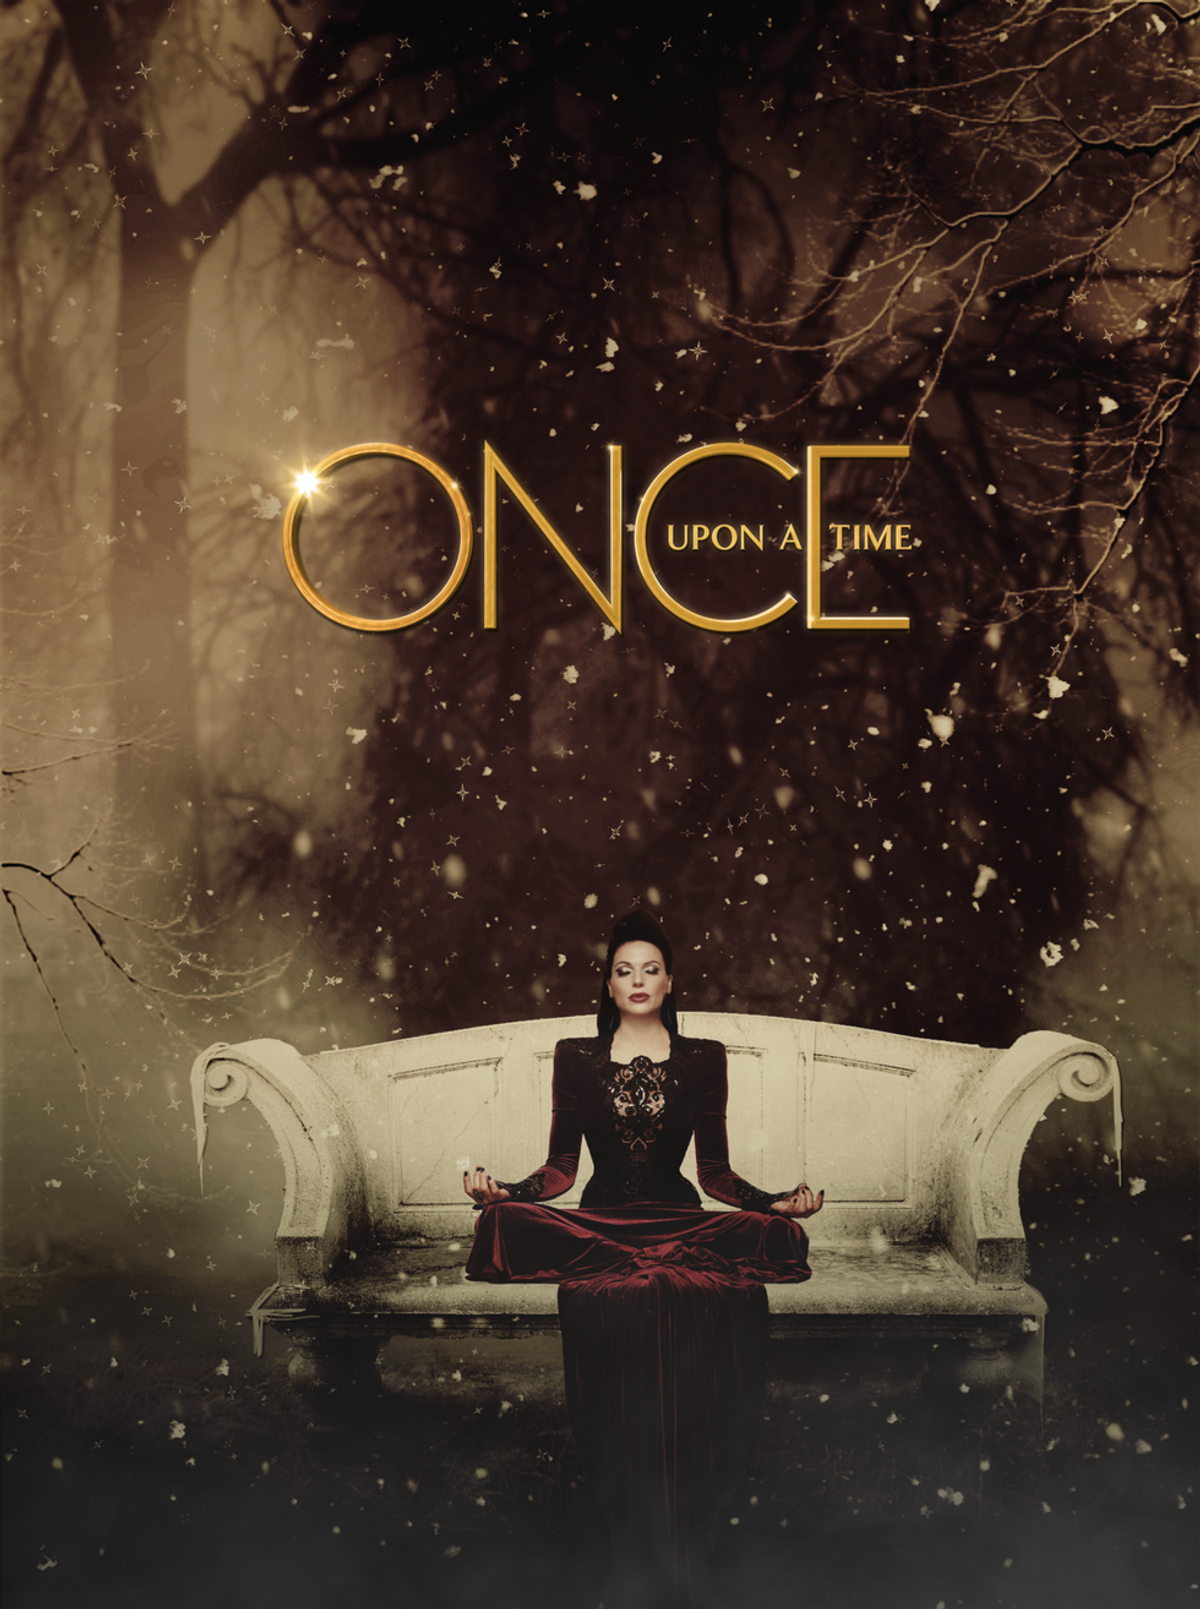 5 Reasons 'Once Upon A Time' Is Like 'Grimms' Fairy Tales"